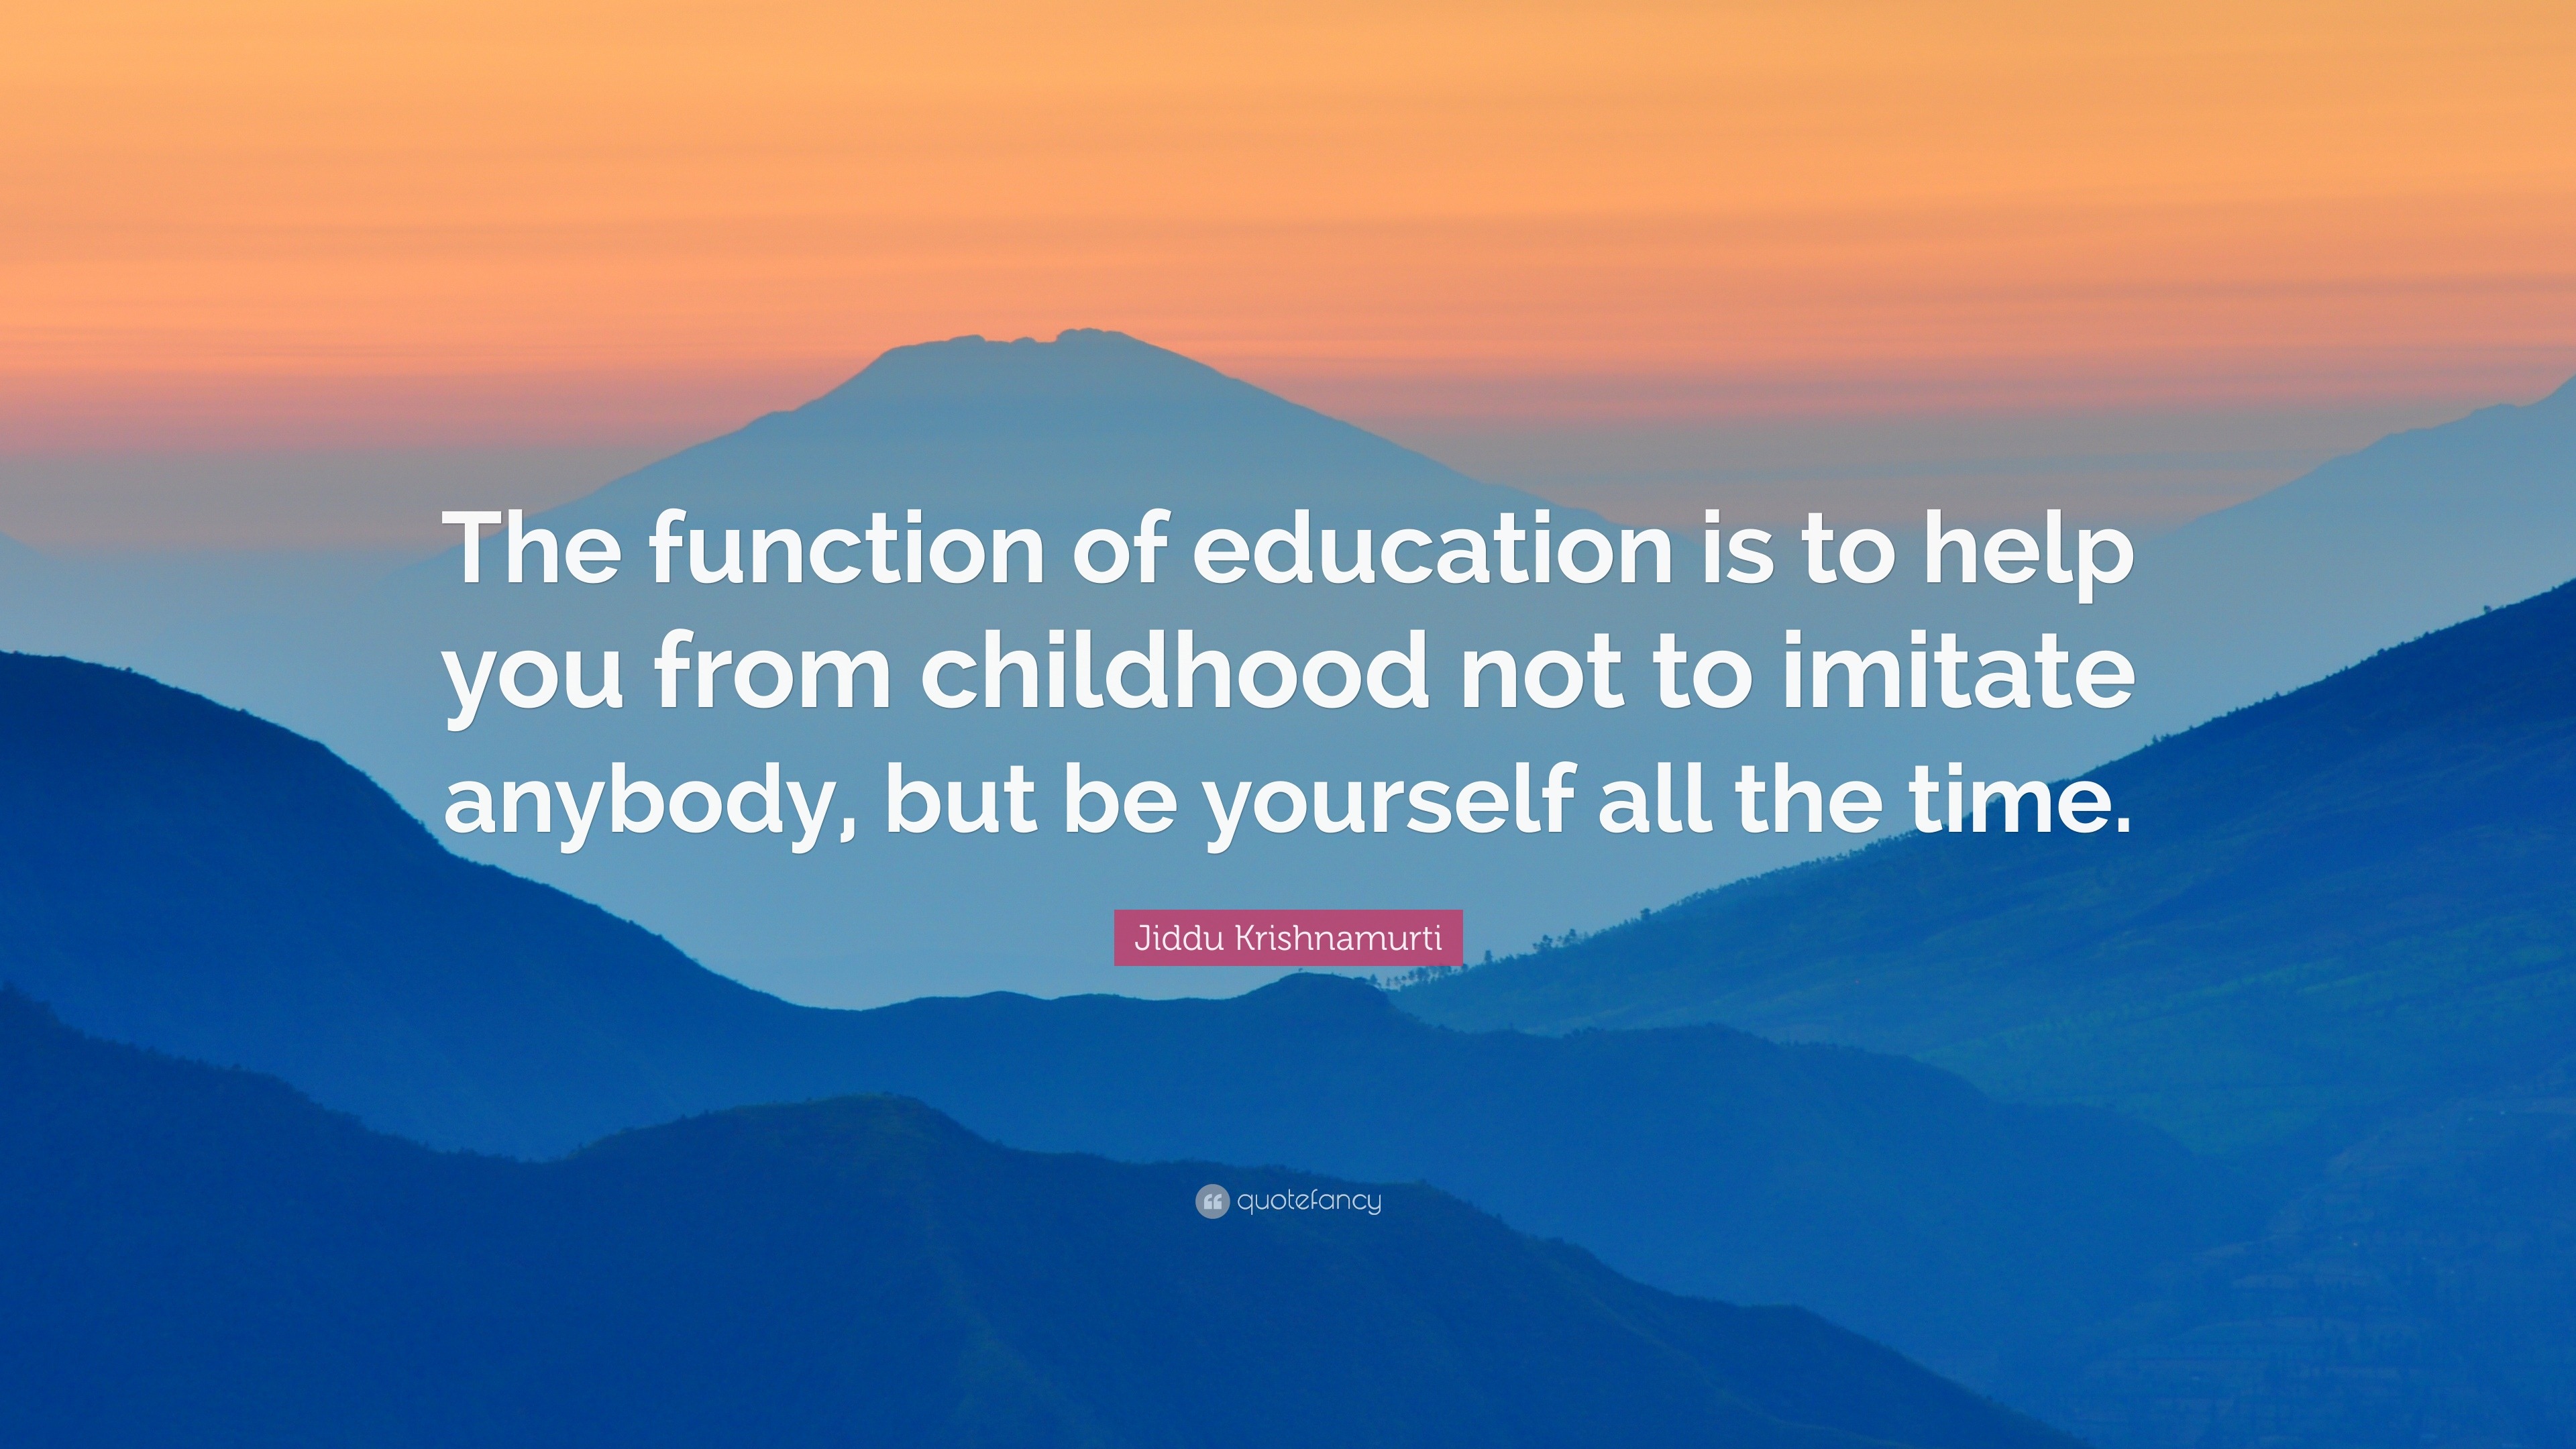 function of education by j krishnamurti conclusion